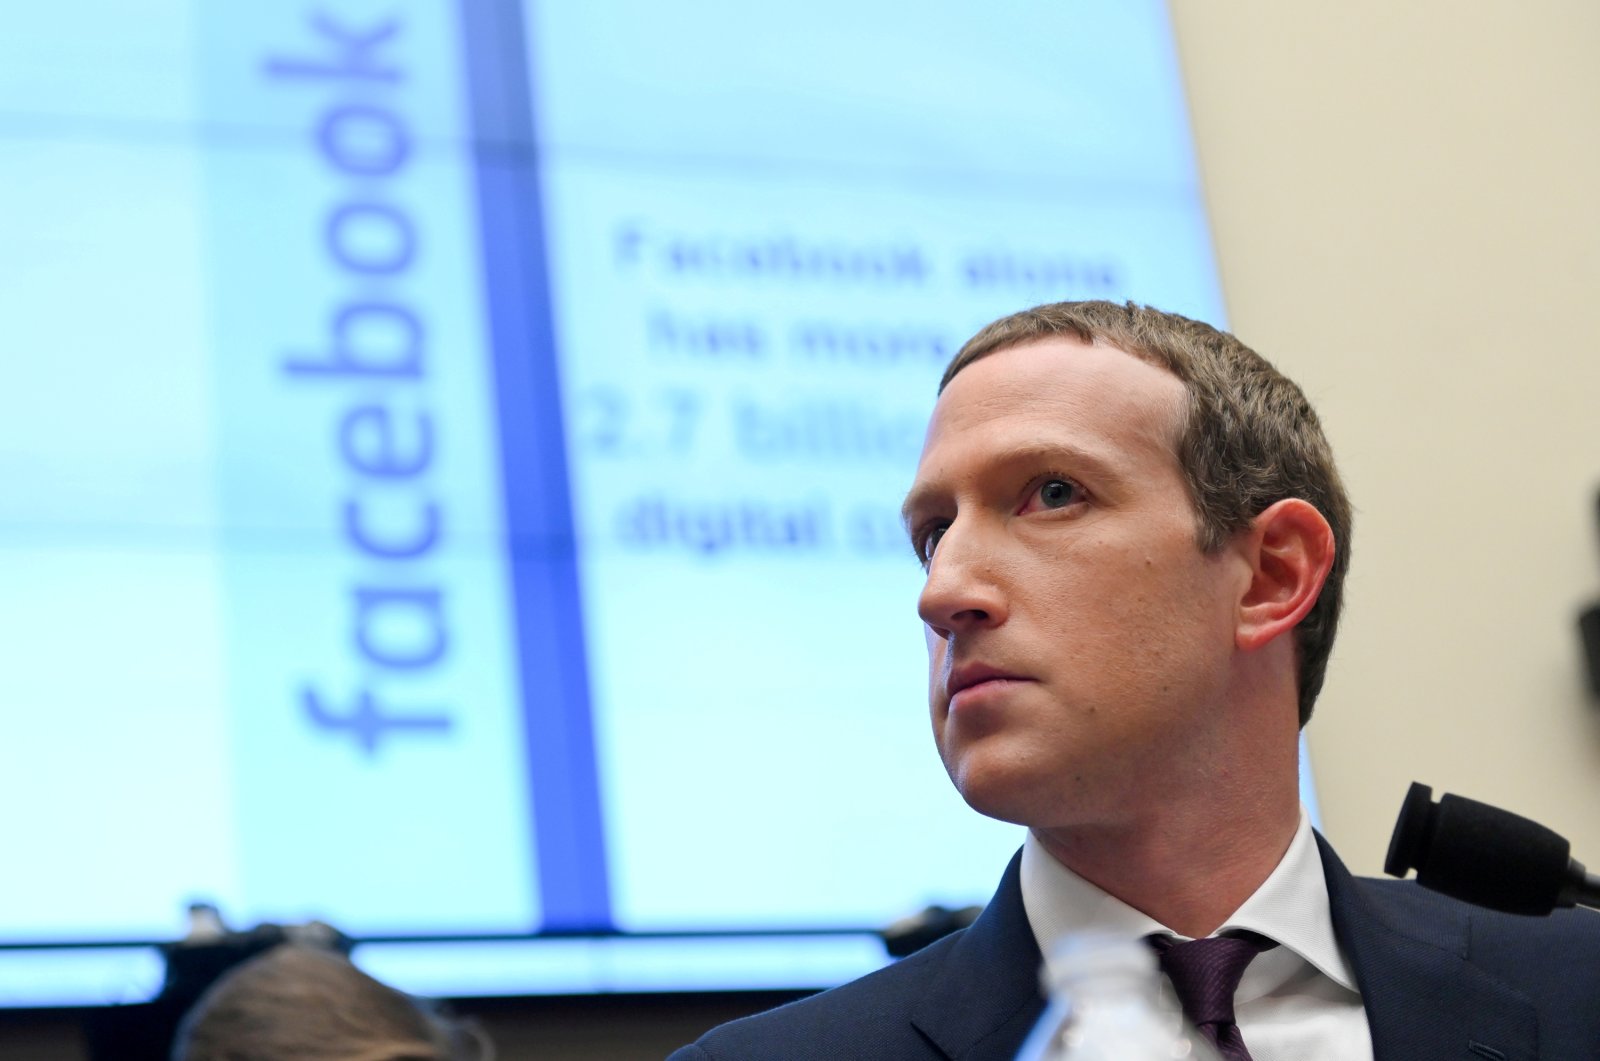 Facebook Chairman and CEO Mark Zuckerberg testifies at a House Financial Services Committee hearing in Washington, D.C., U.S., Oct. 23, 2019. (Reuters Photo)